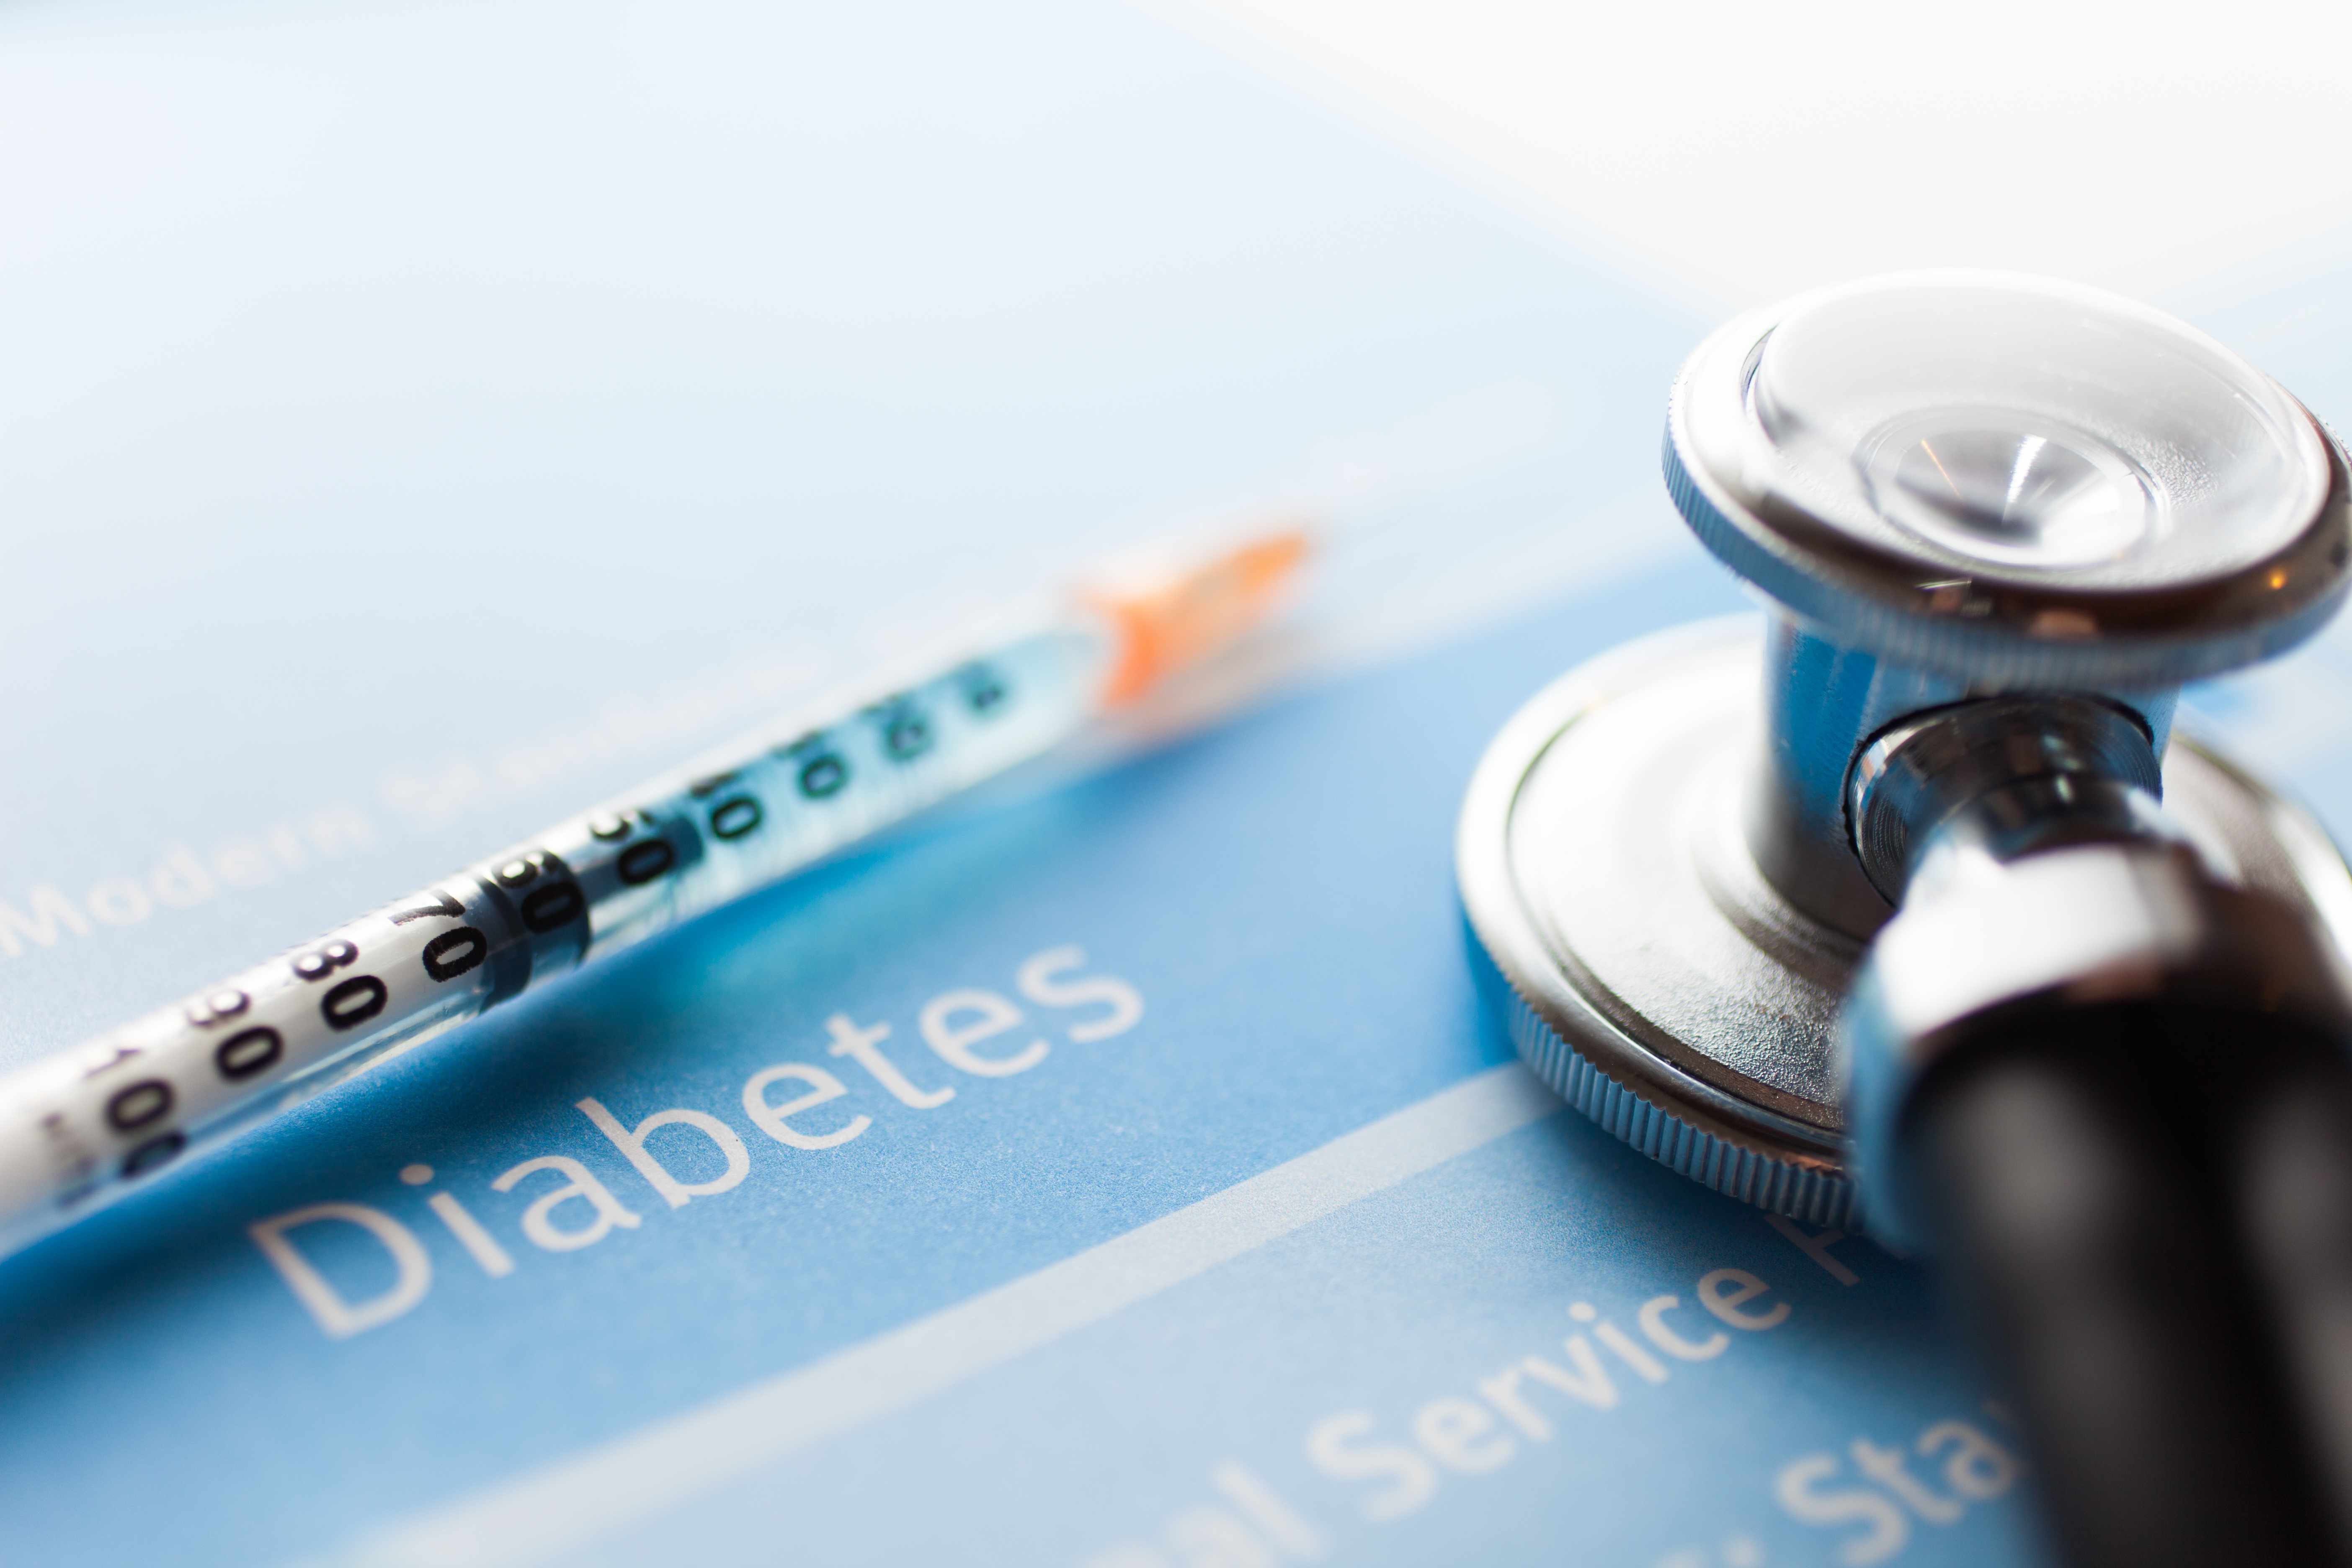 People over 40 more prone to diabetes in Azerbaijan